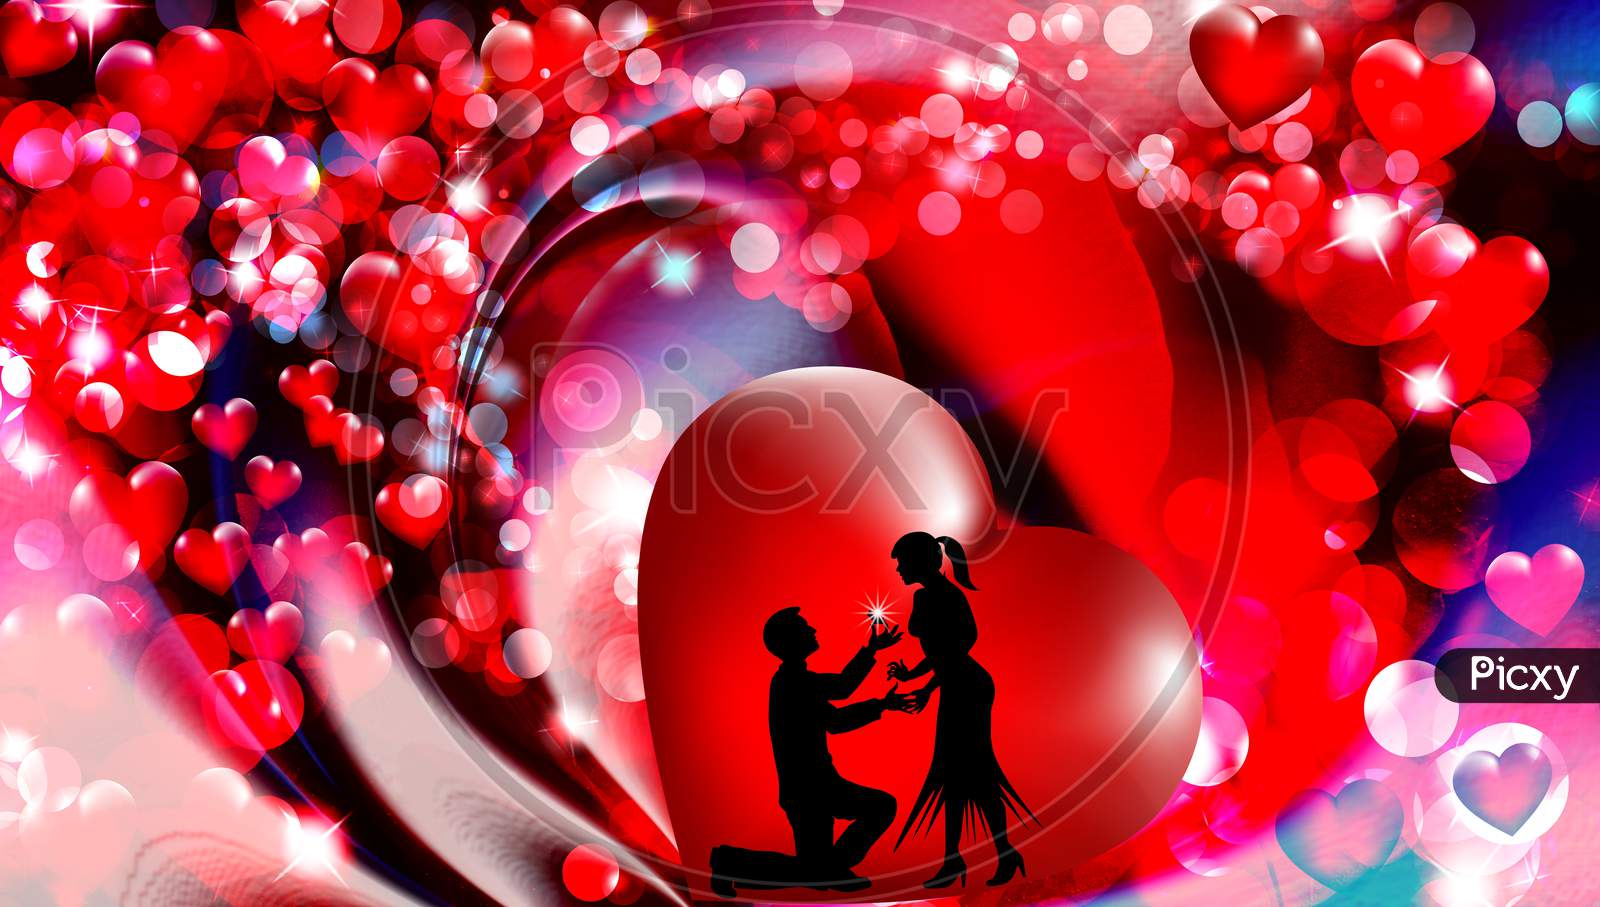 Image Of Valentines Day Couple Proposing With Diamond Ring. Love Heart Valentines Background, Valentine Day Love. VT336451 Picxy